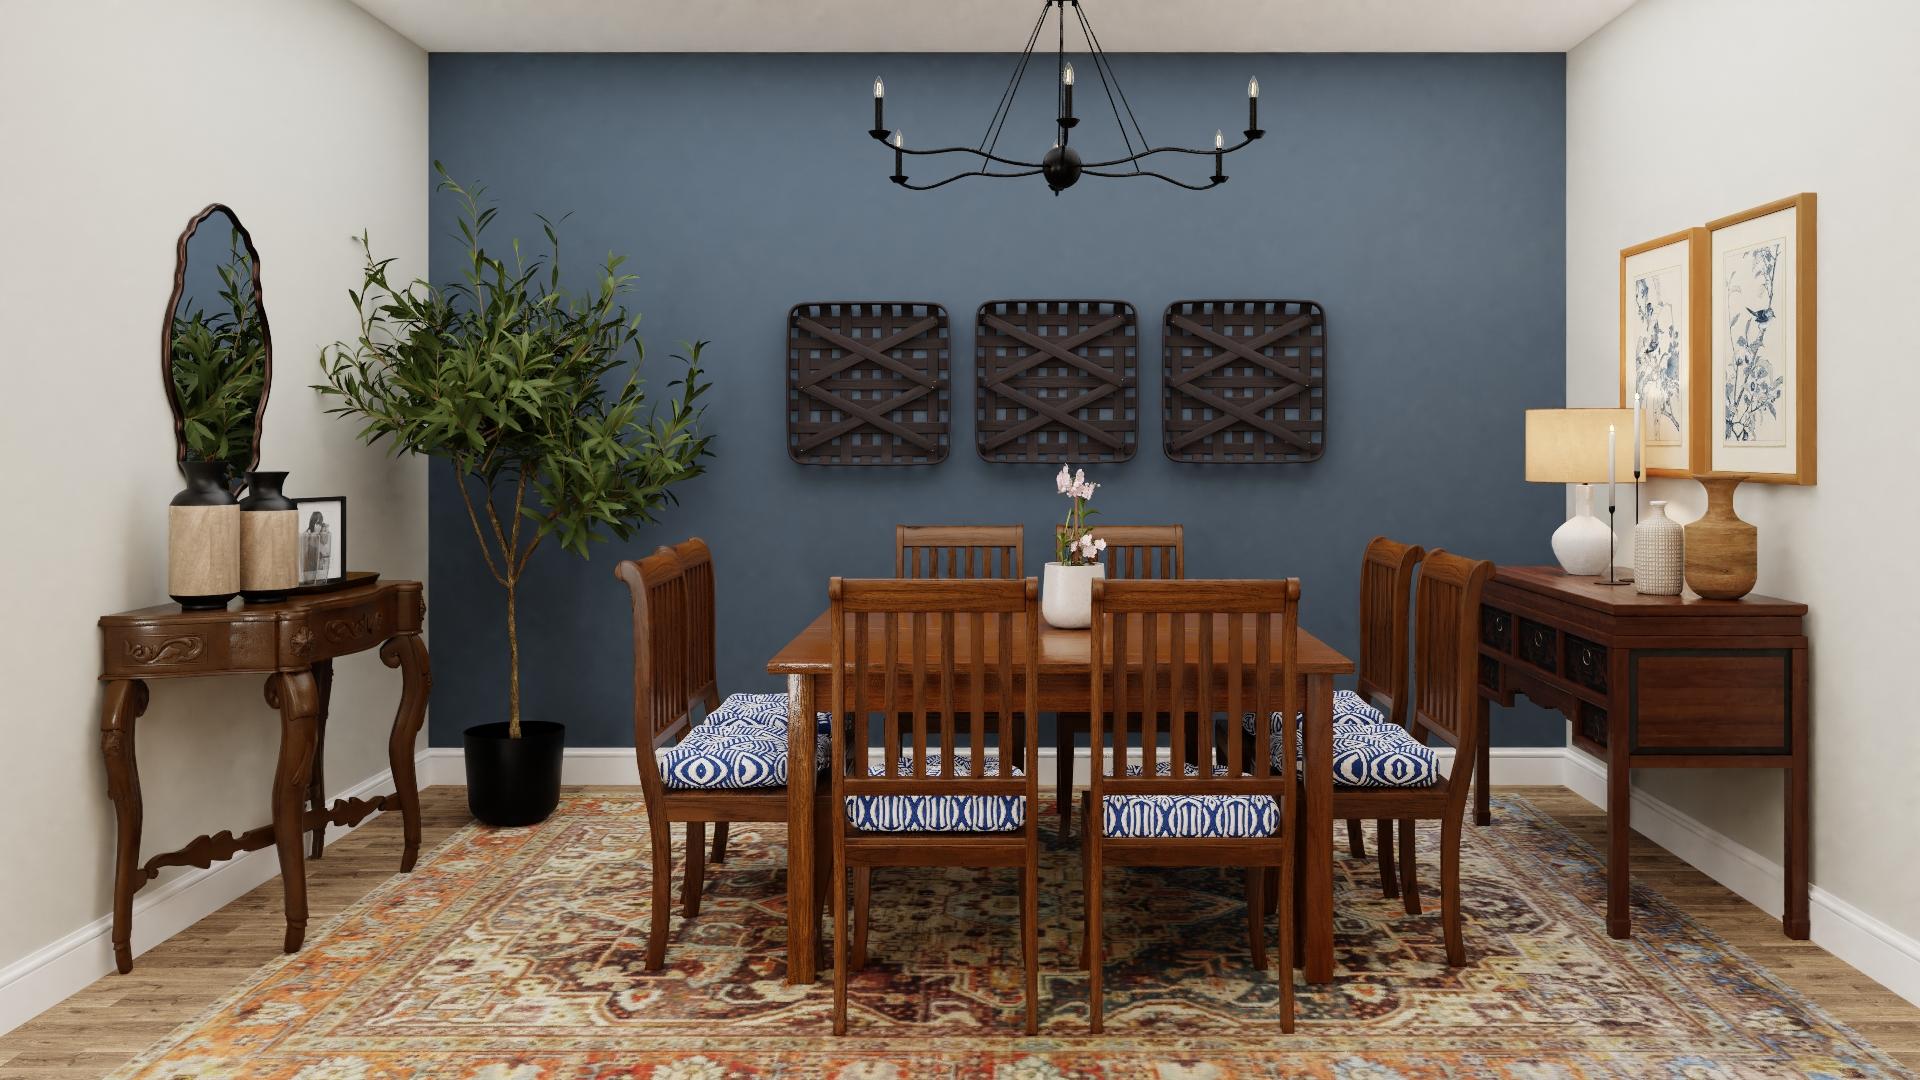 Split Wood Wall Art Brings Drama To The Traditional Dining Room